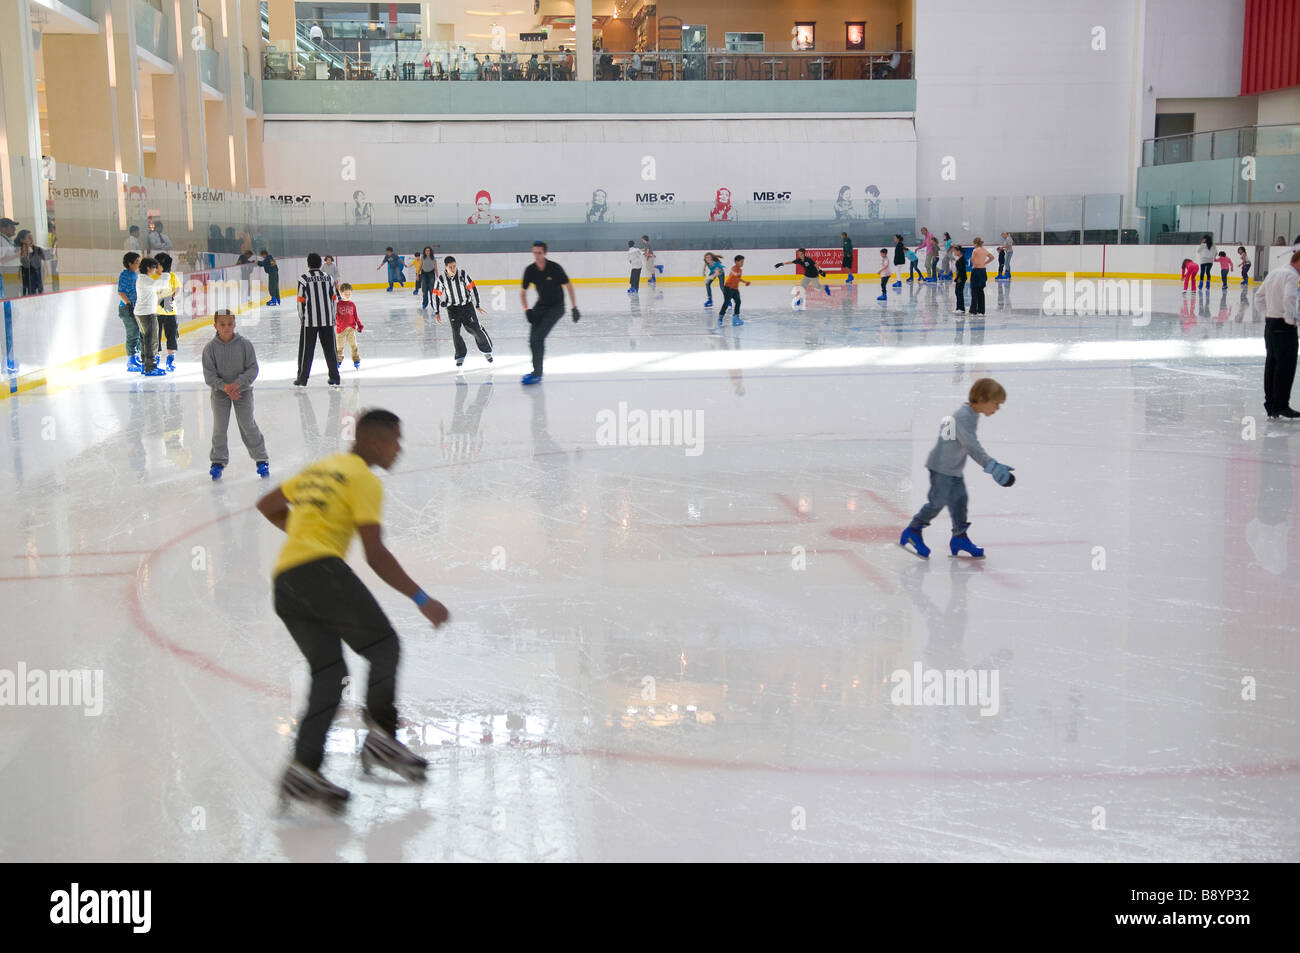 skaters on ice rink in shopping mall, dubai, uae Stock Photo